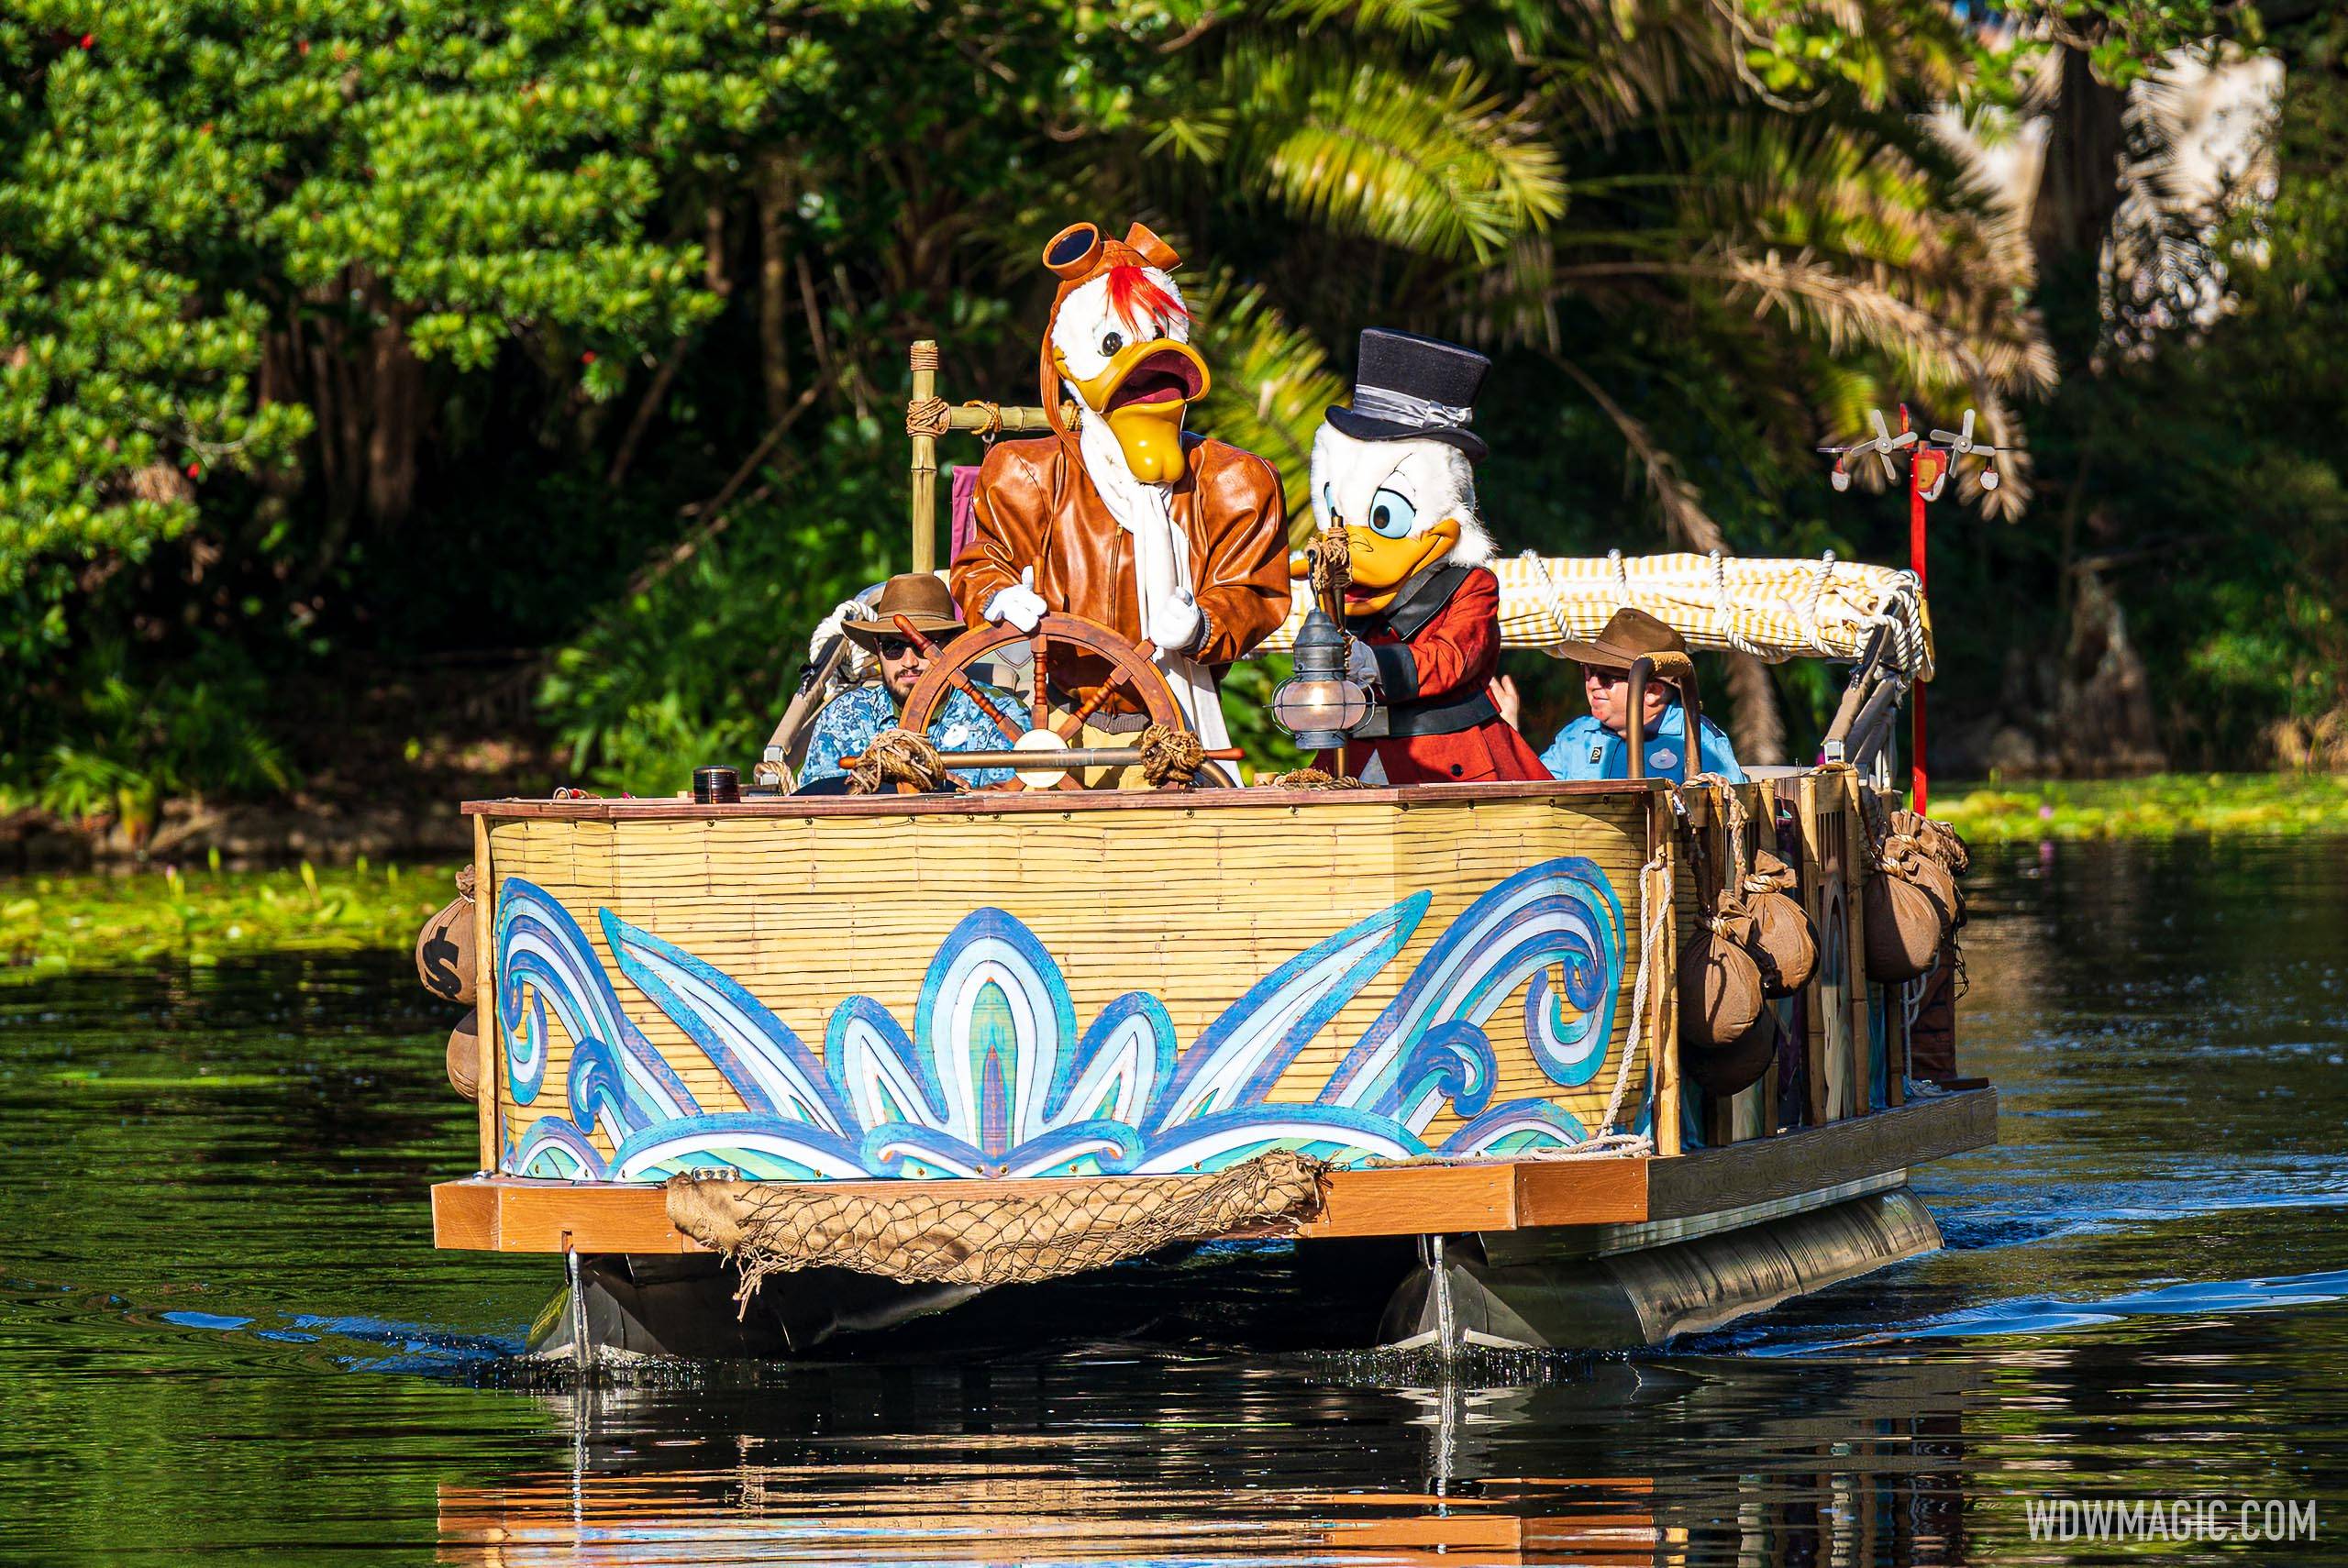 Adventurer's Flotilla sets sail at Disney's Animal Kingdom with Disney  Ducks and explorers from Up